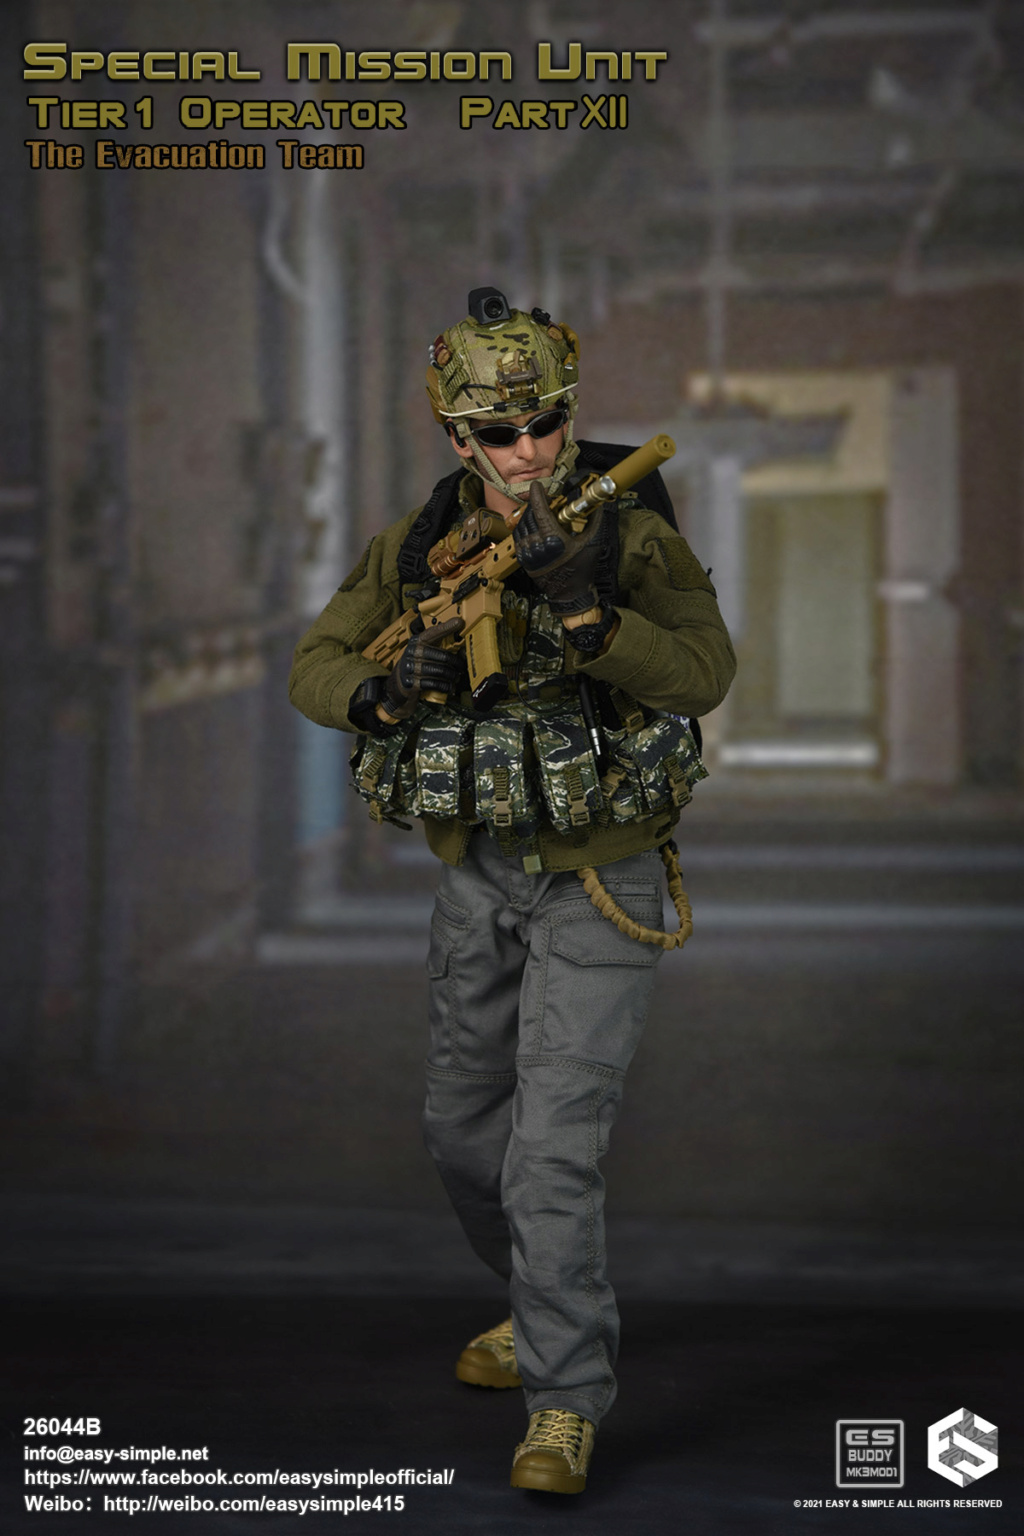 EvacuationTeam - NEW PRODUCT: Easy&Simple: 26044B Special Mission Unit Tier1 Operator Part XII The Evacuation Team 940a2210